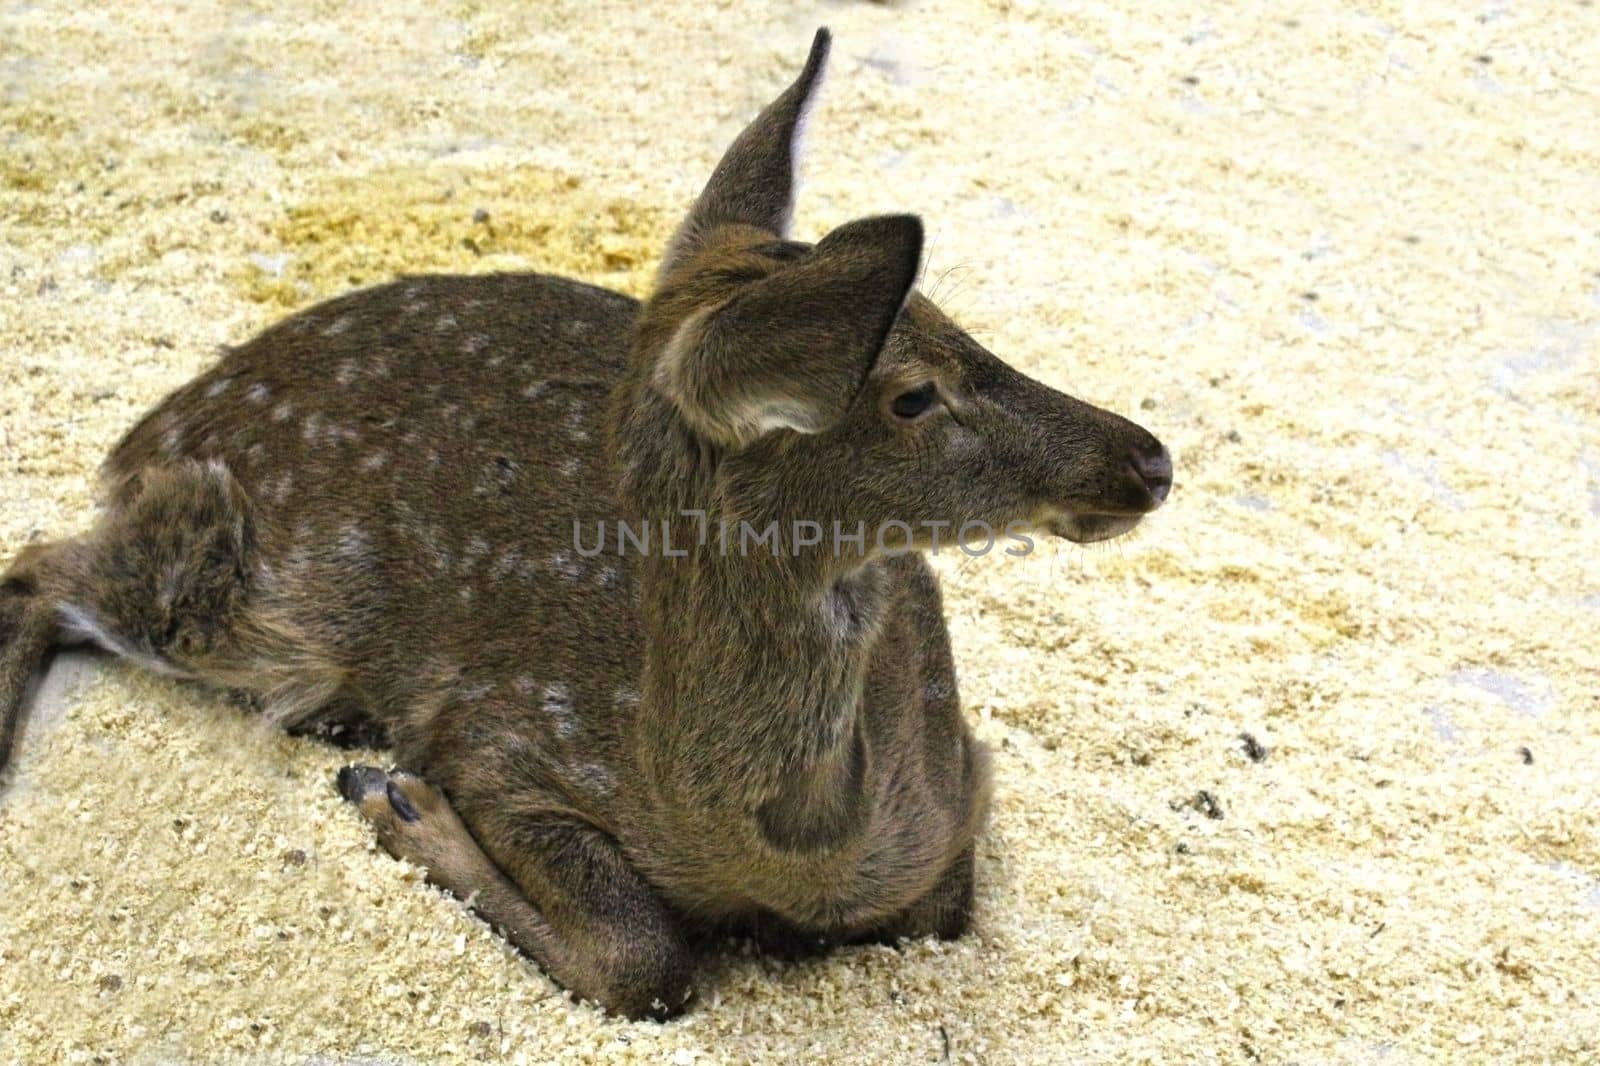 A young female sika deer lies with her head turned away on sawdust in an enclosure. Defocus.